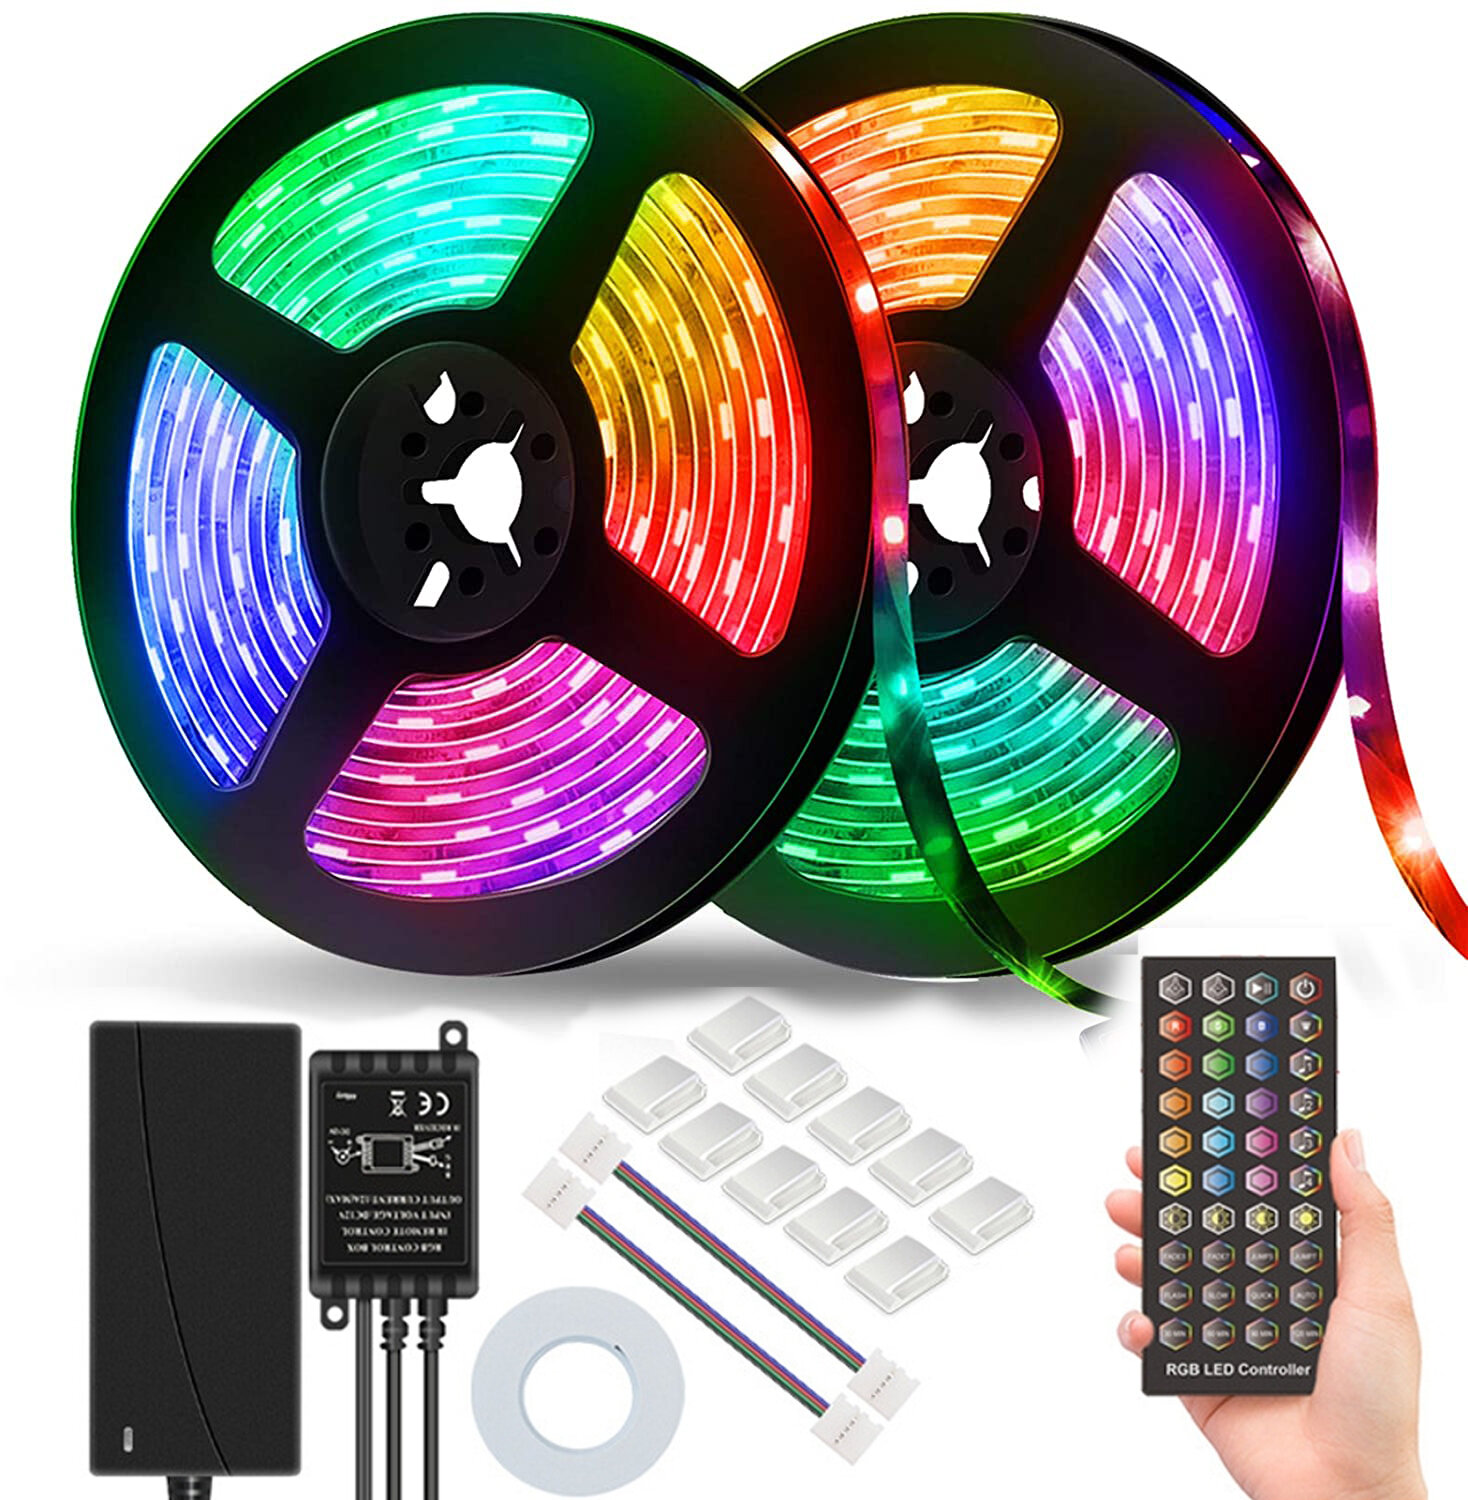 DC12V 5M/10M 5050 RGB Timer Function LED Strip Light Waterproof With 40kEYS Remote Control + Music Controller